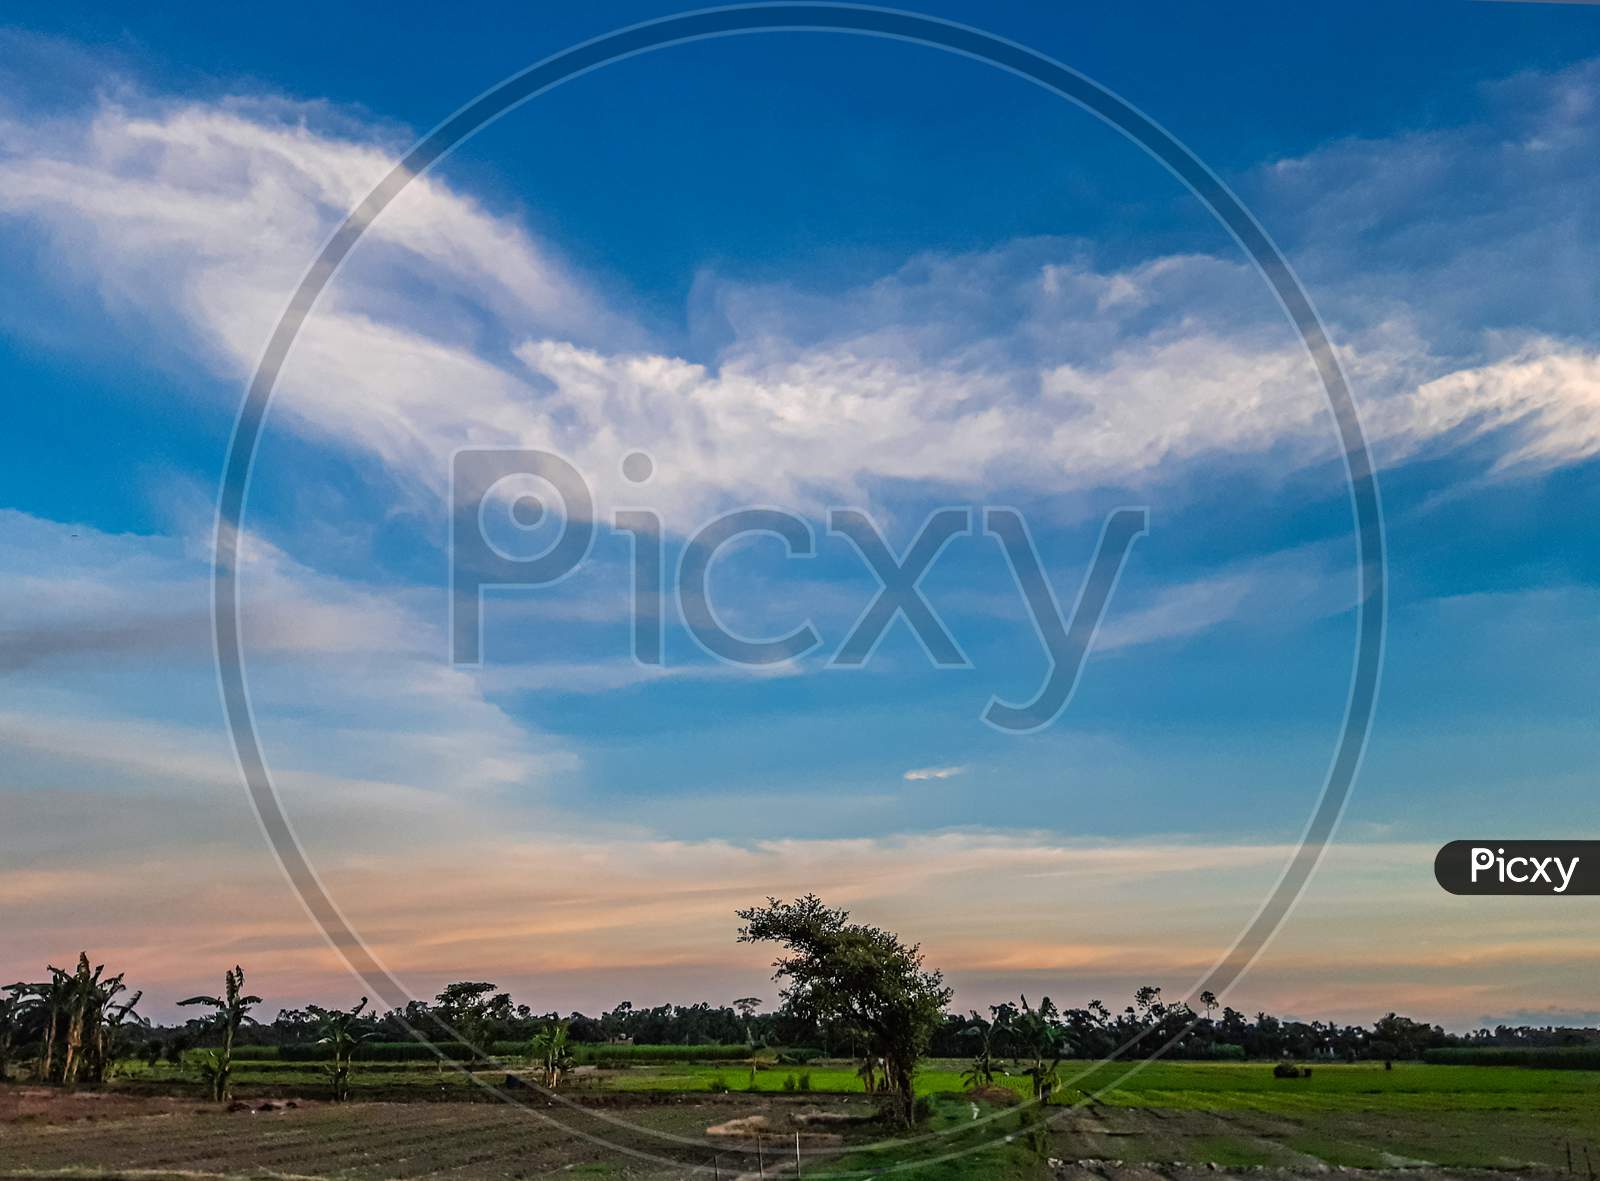 Agricultural Land In Rural India At Sunset. White Clouds In The Blue Sky And A Pair Of Horizon Skies.